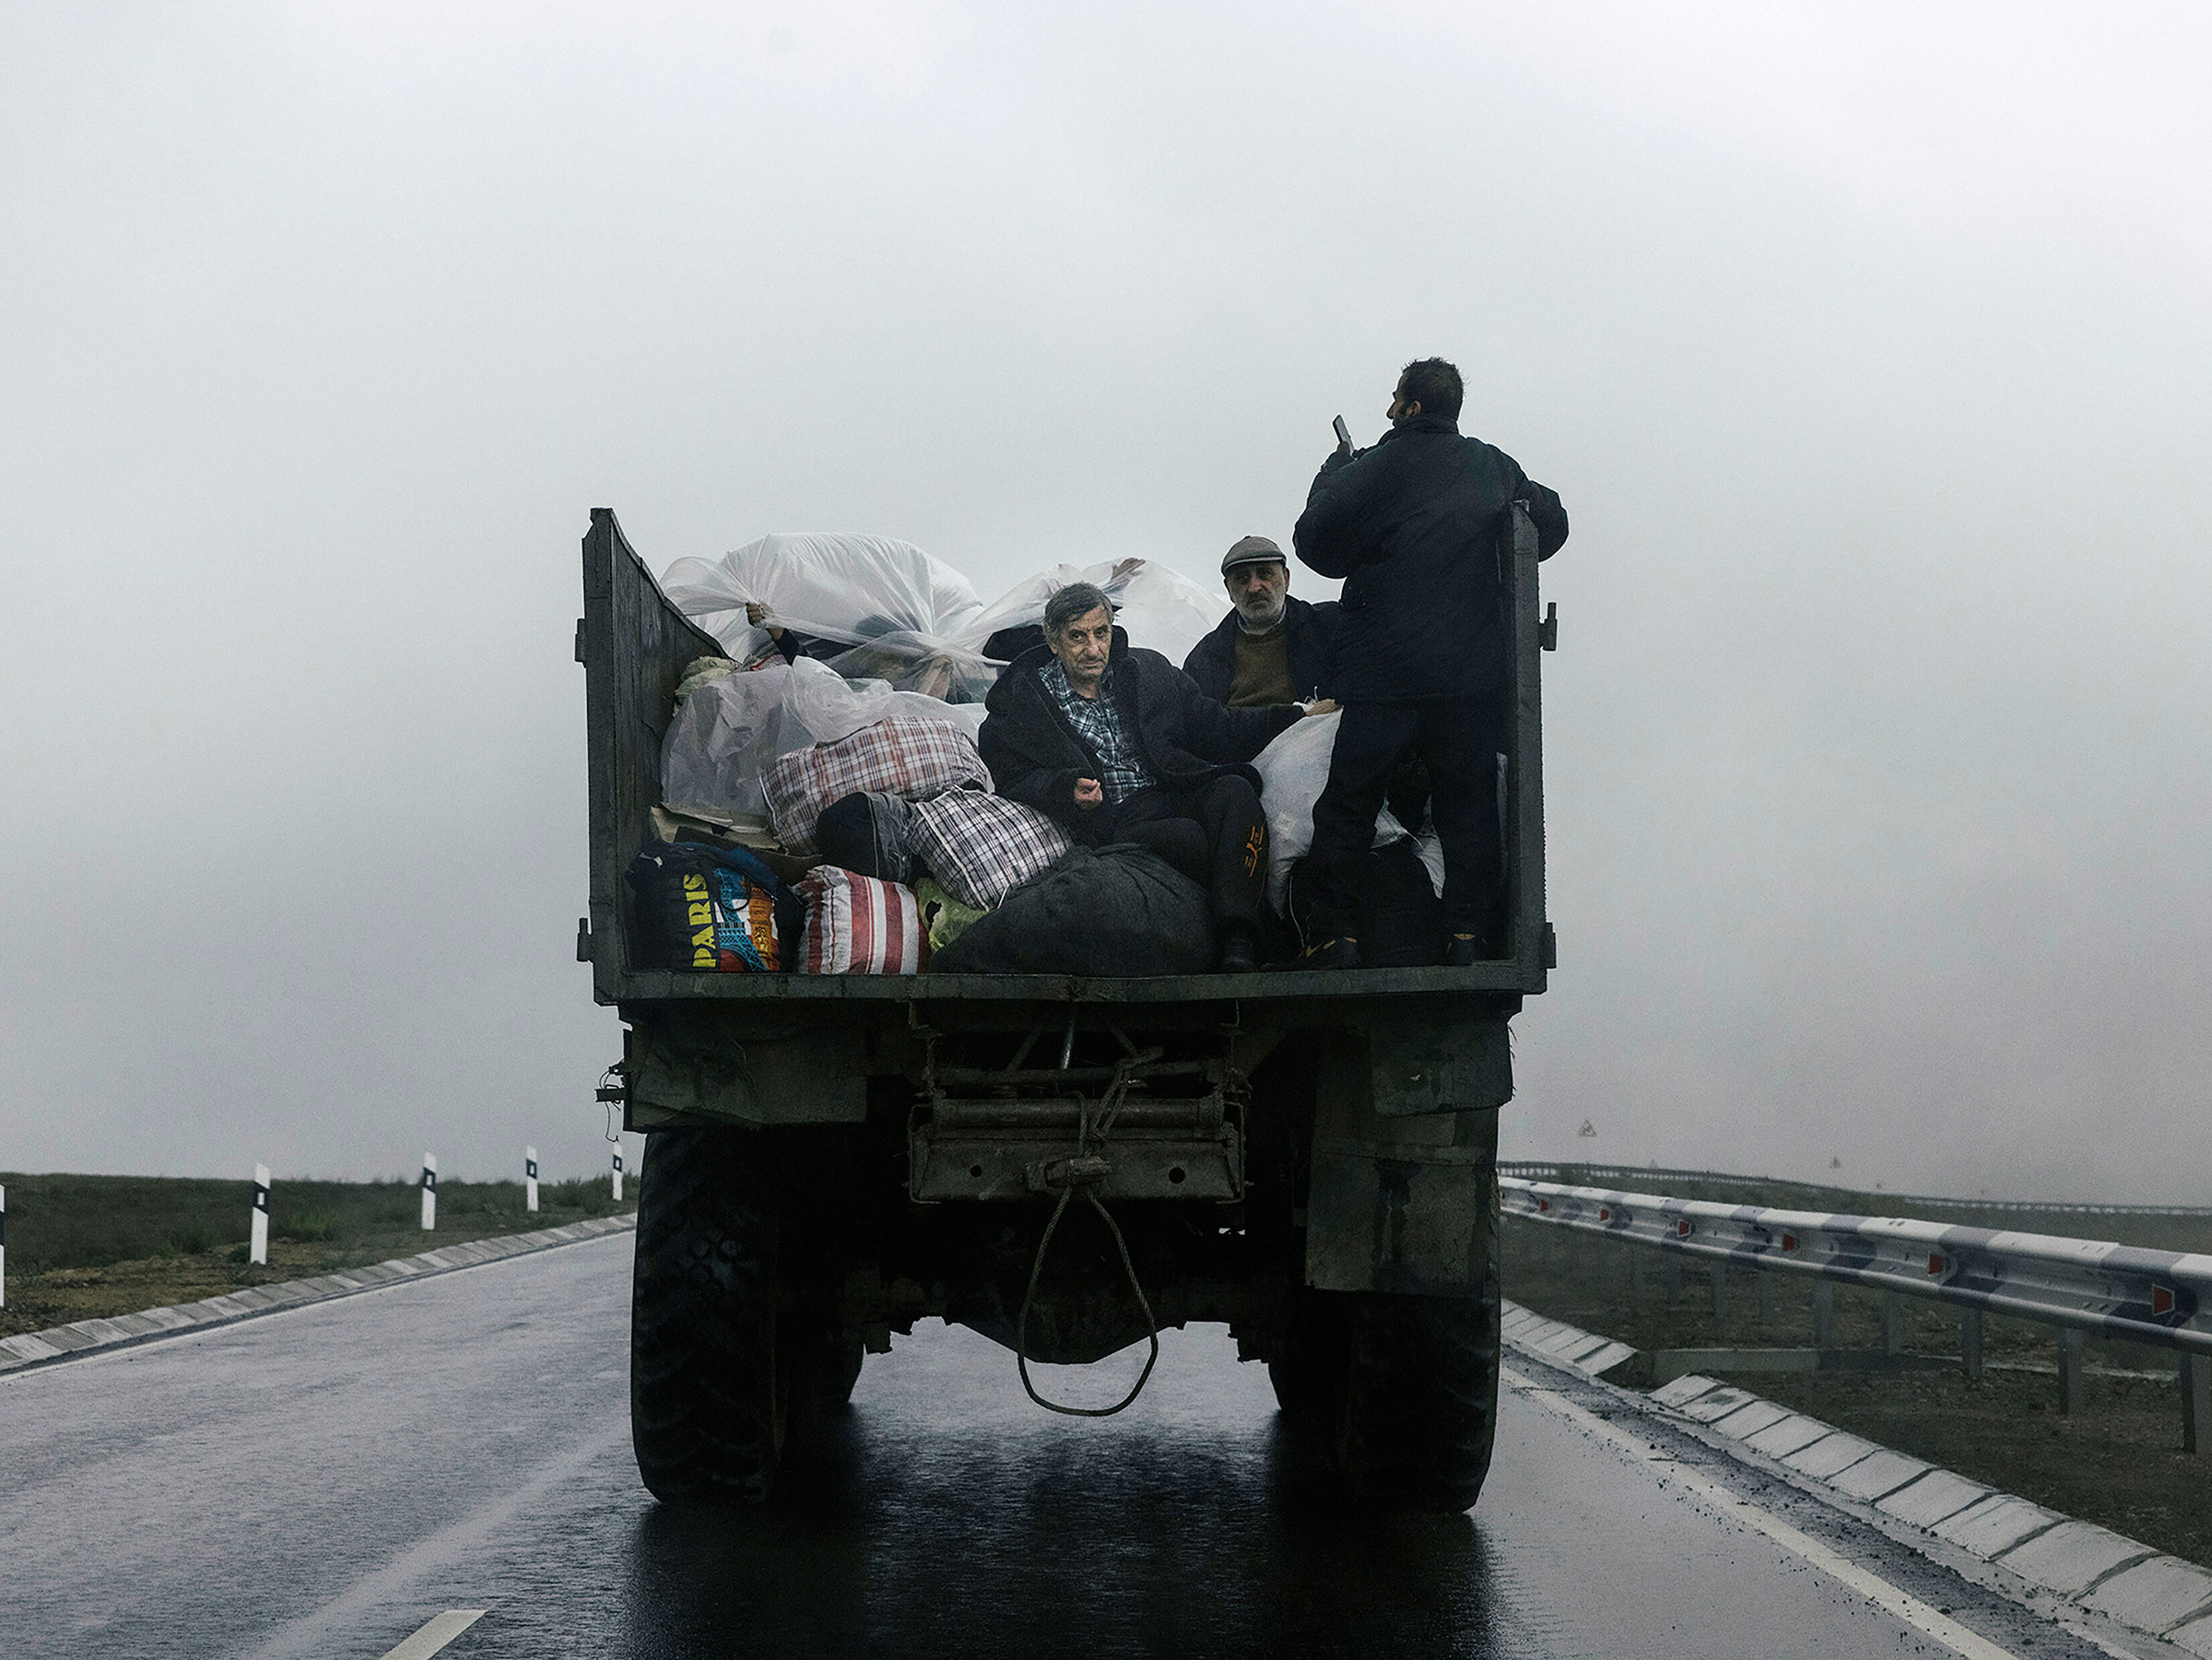 A vehicles carries refugees from Nagorno-Karabakhb as they arrive in Kornidzor, Armenia, on Sept. 25.